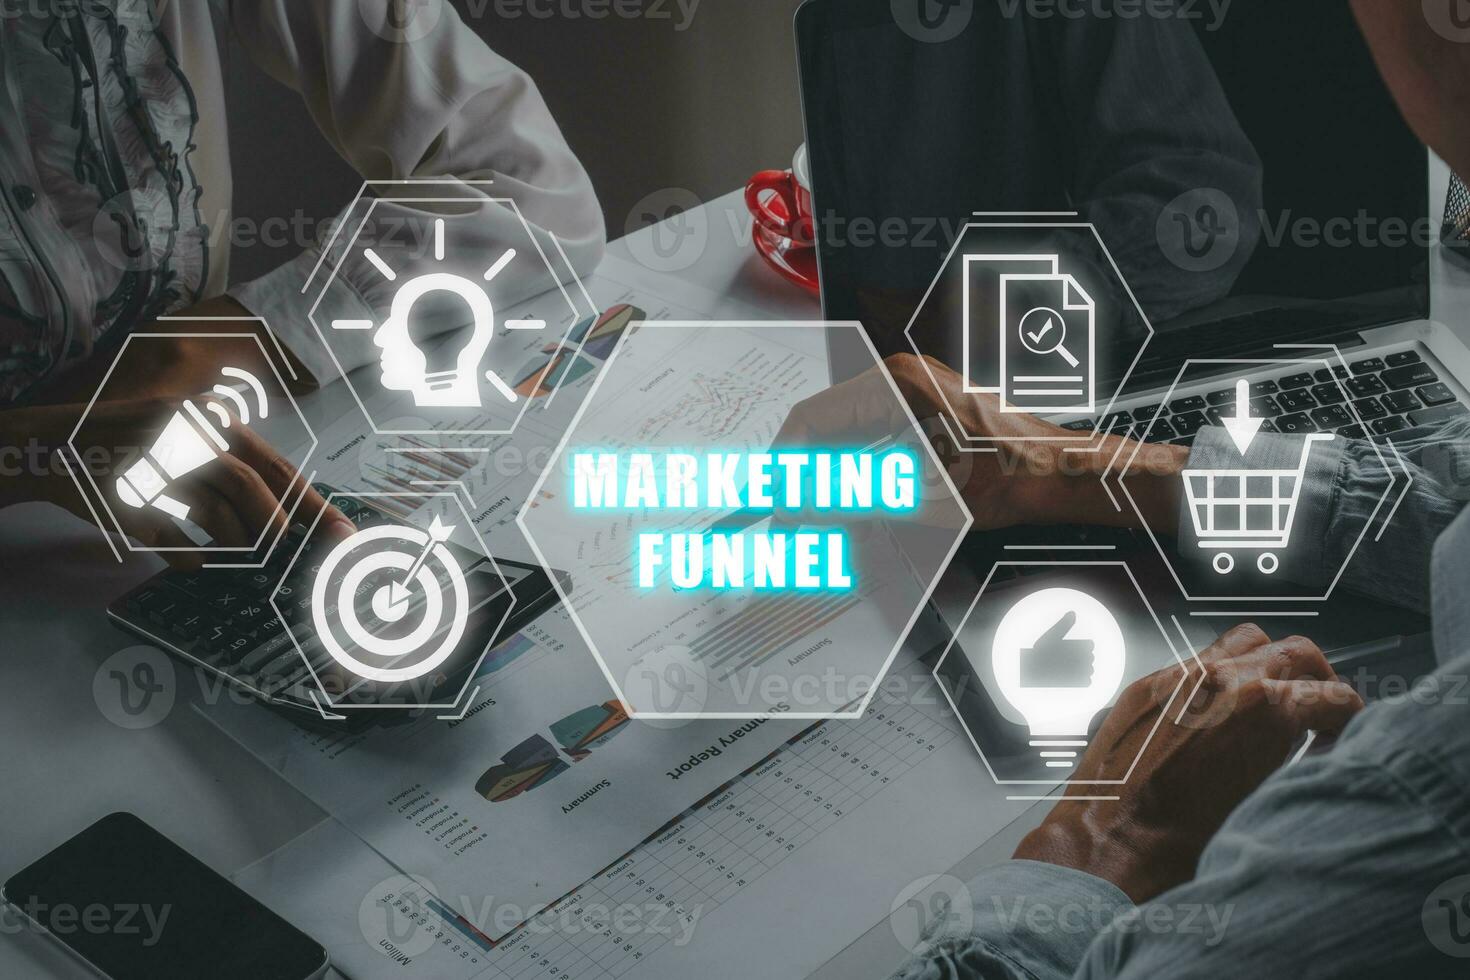 Marketing funnel concept, Business team analyzing income charts and graphs with marketing funnel icon on virtual screen. photo